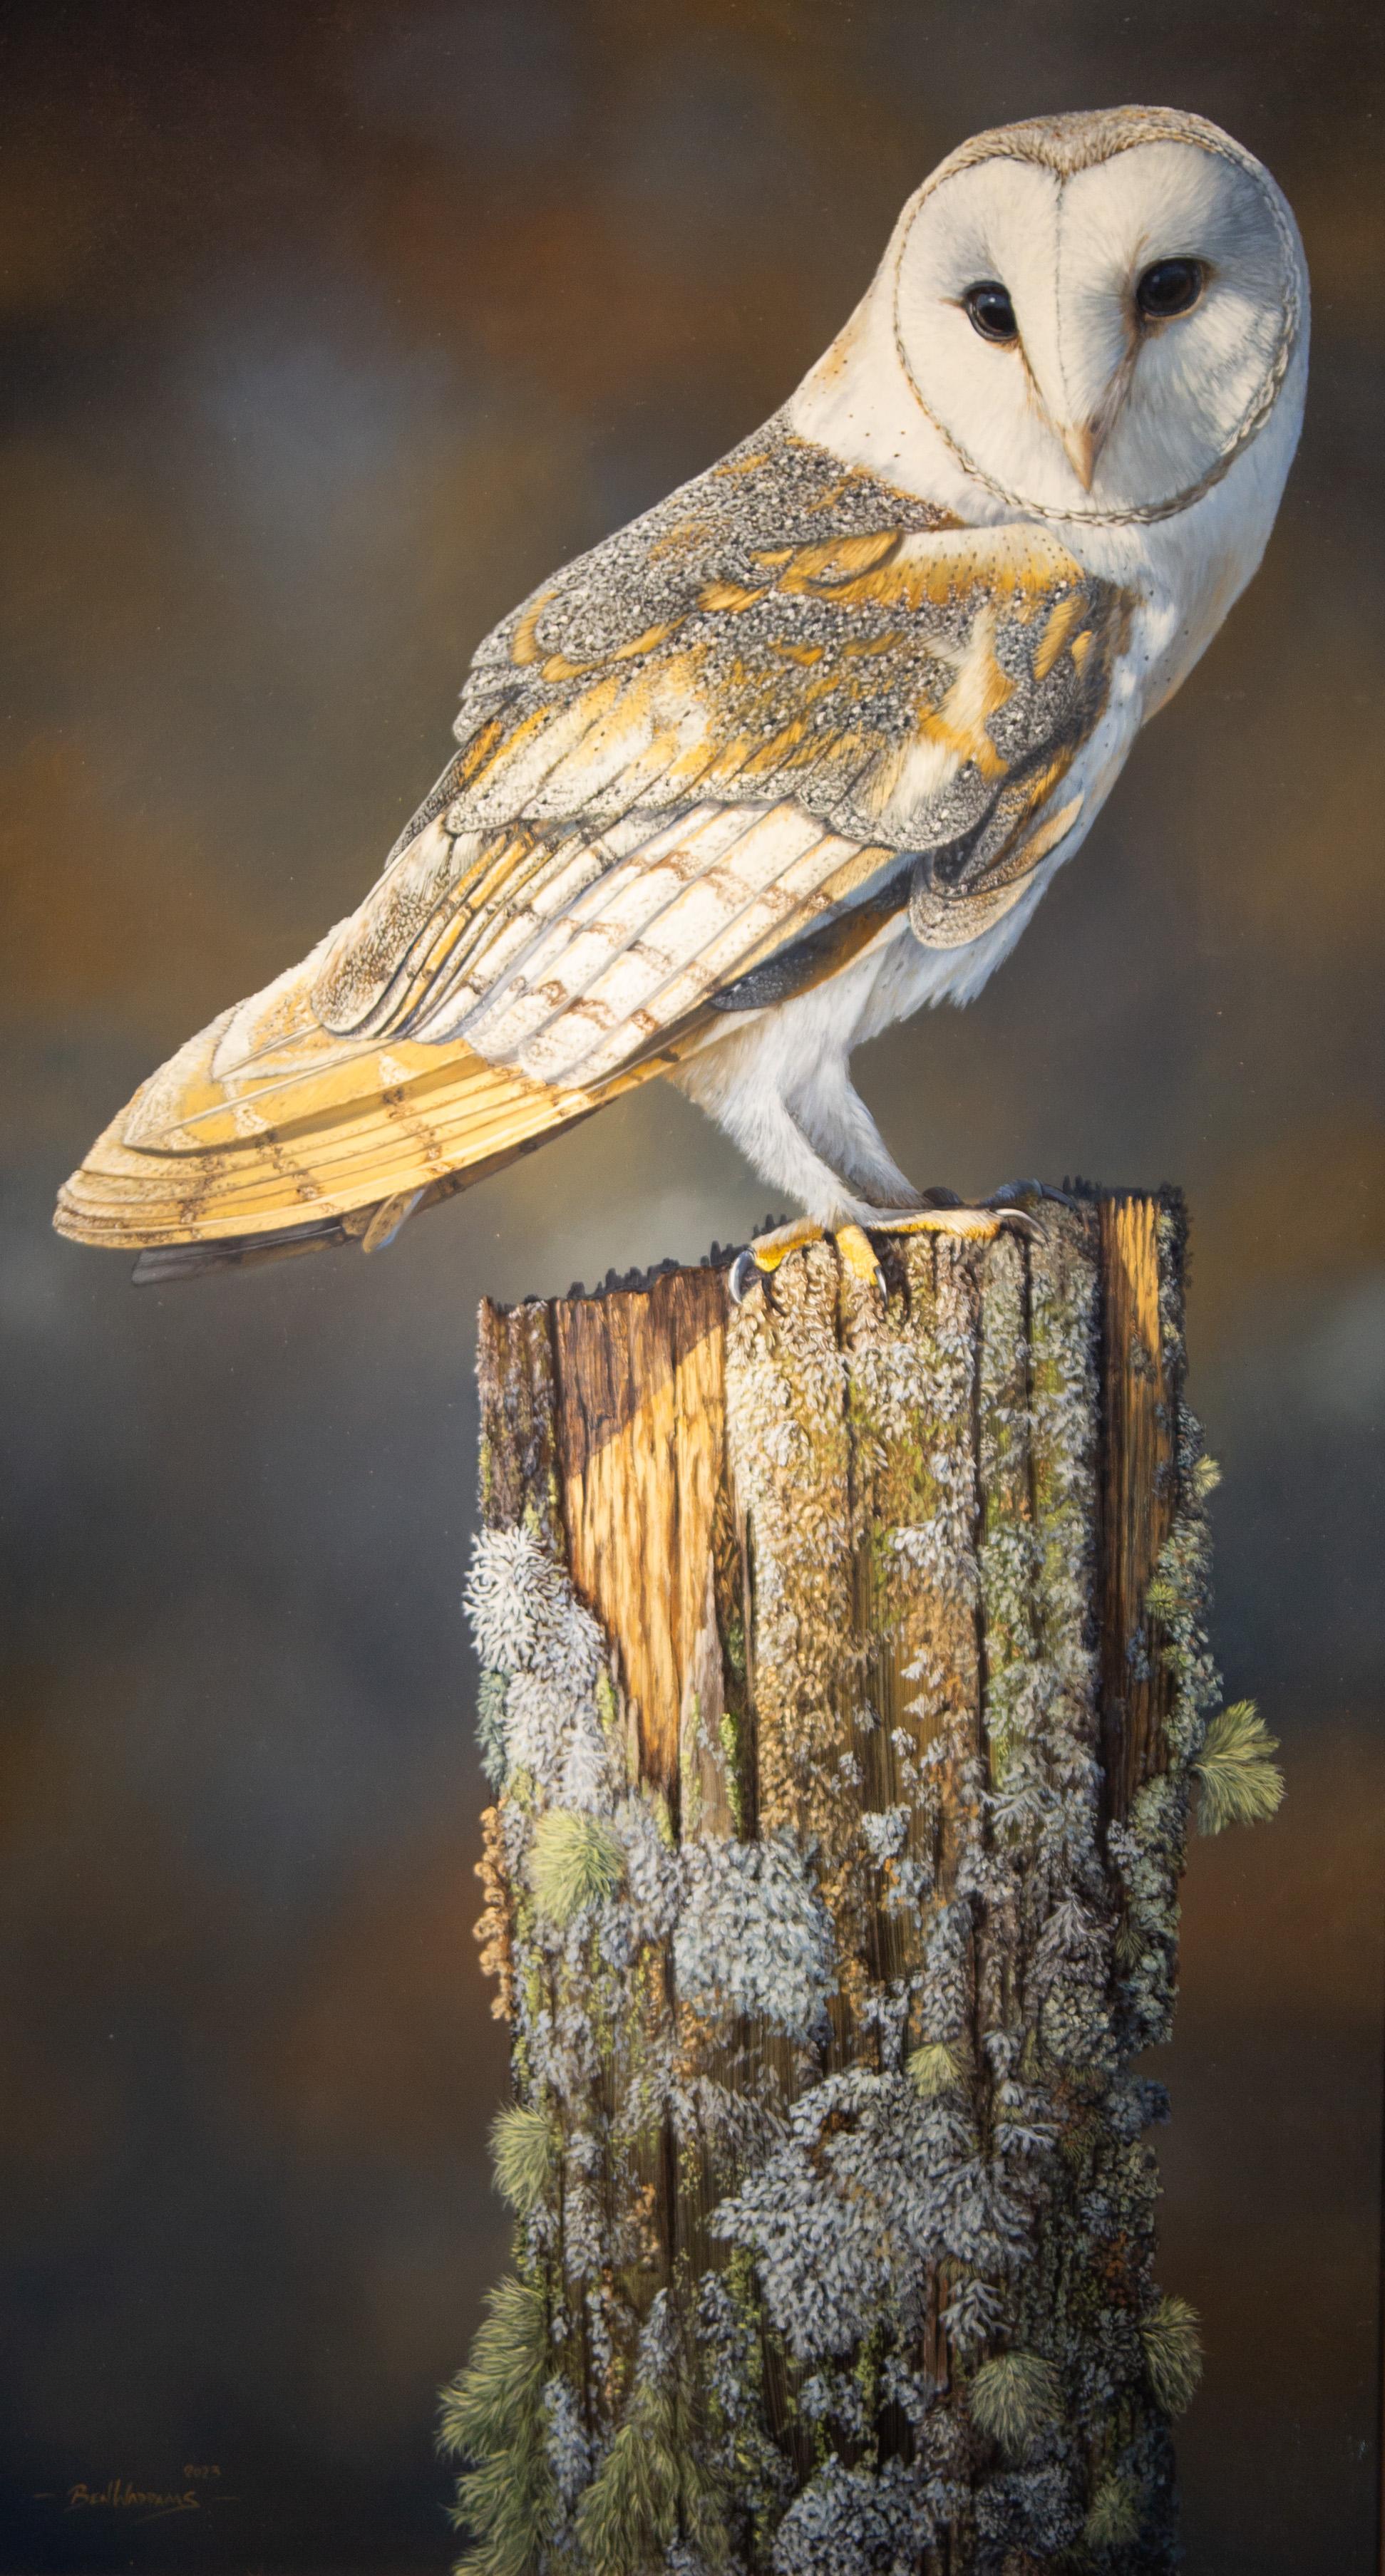 Ben Waddams Animal Painting - 'The Watcher' Photorealist painting of a barn owl on a tree stump nature, wild